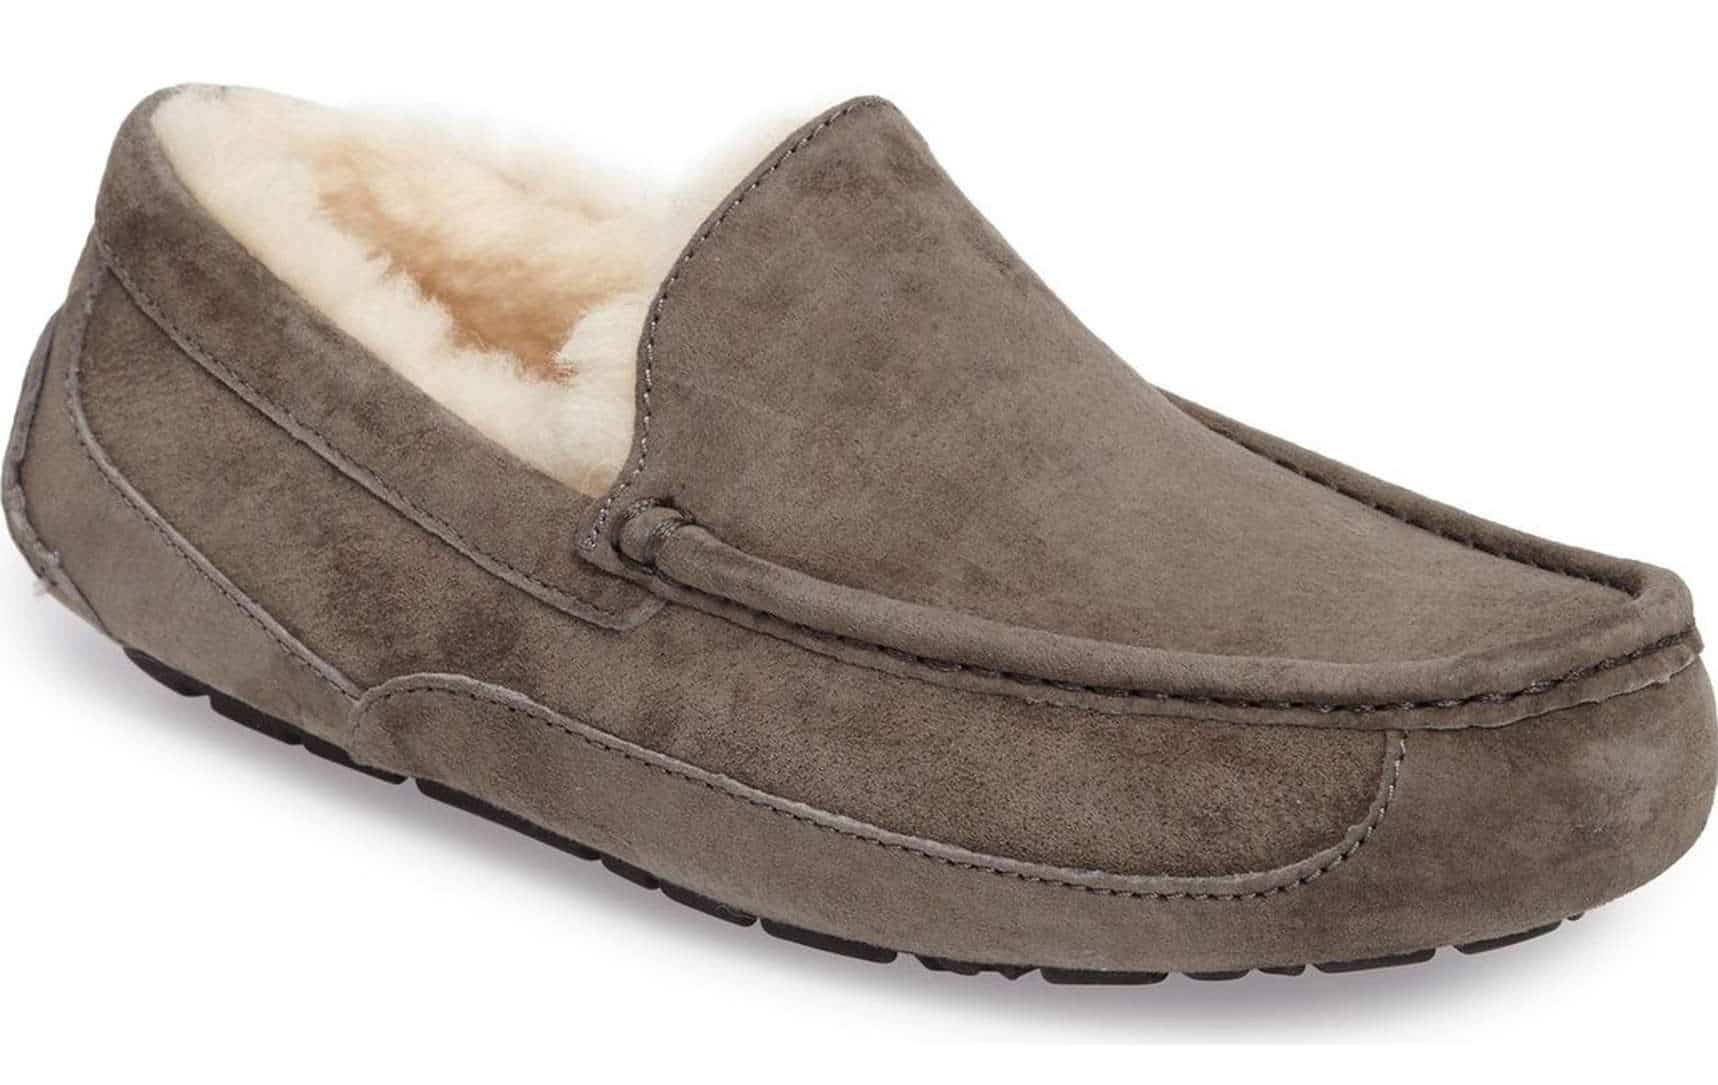 Best Mens Slippers 2017: Cheap Ugg Ascot Suede Slipper for Man 2018